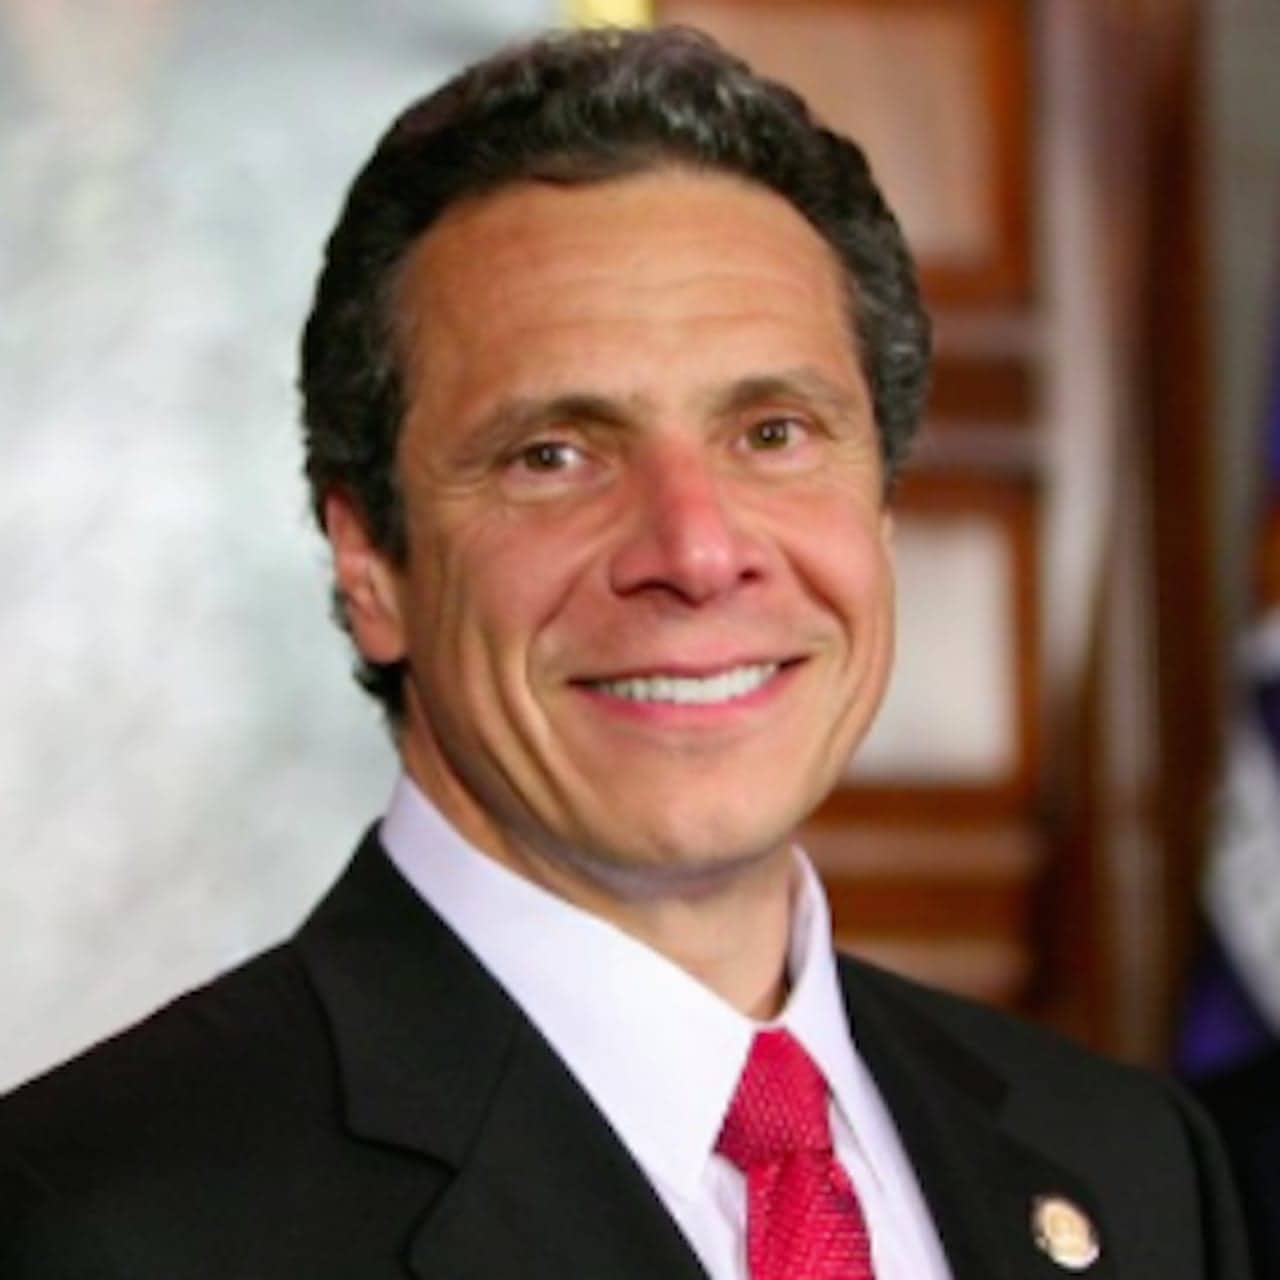 Gov. Andrew Cuomo called it a good thing that the NRA is attacking him for his stands on guns.